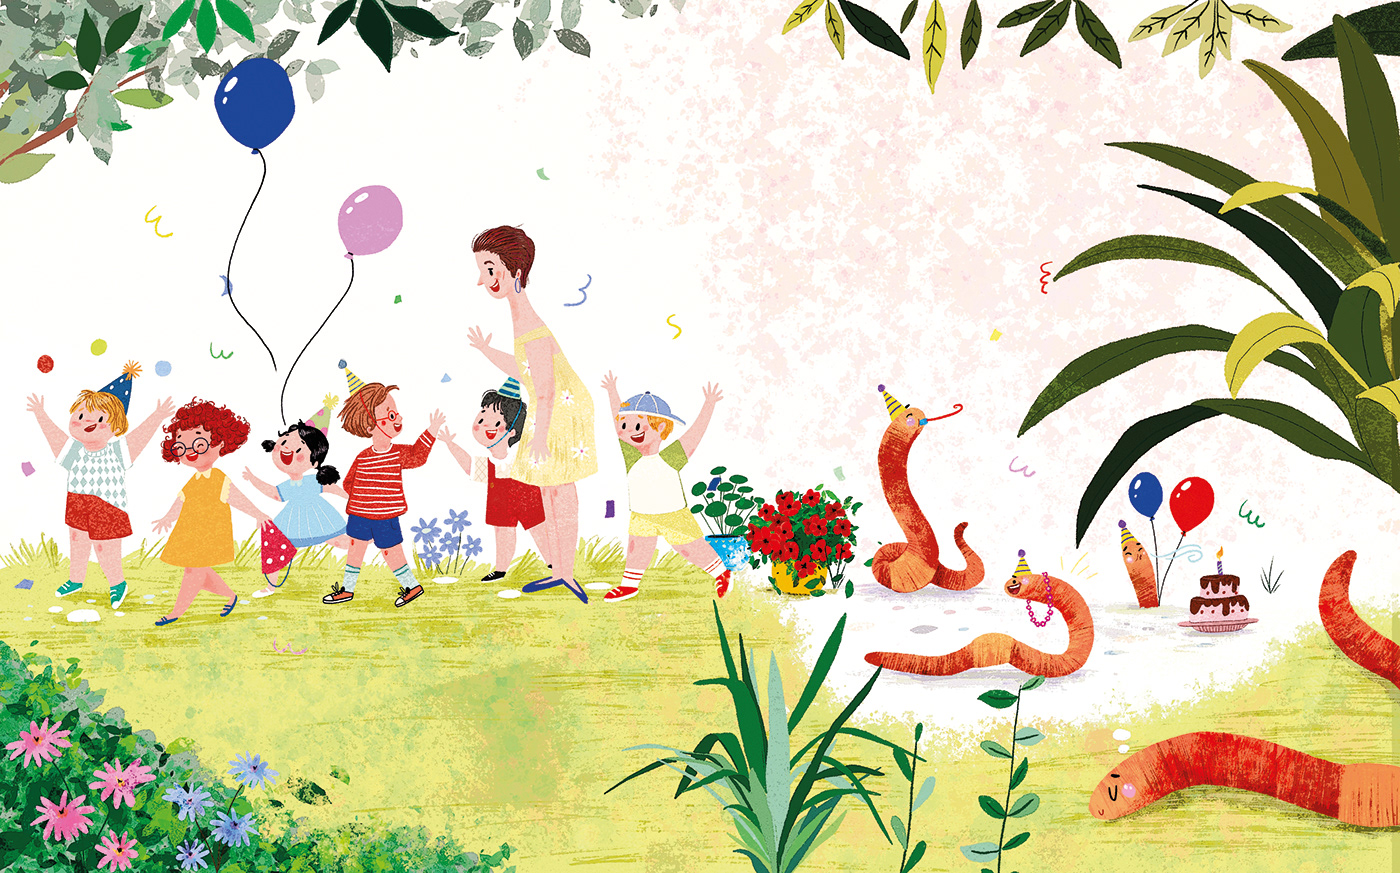 ILLUSTRATION  Drawing  picturebook childrensbook Character design  cartoon garden Colourful  texture brushes